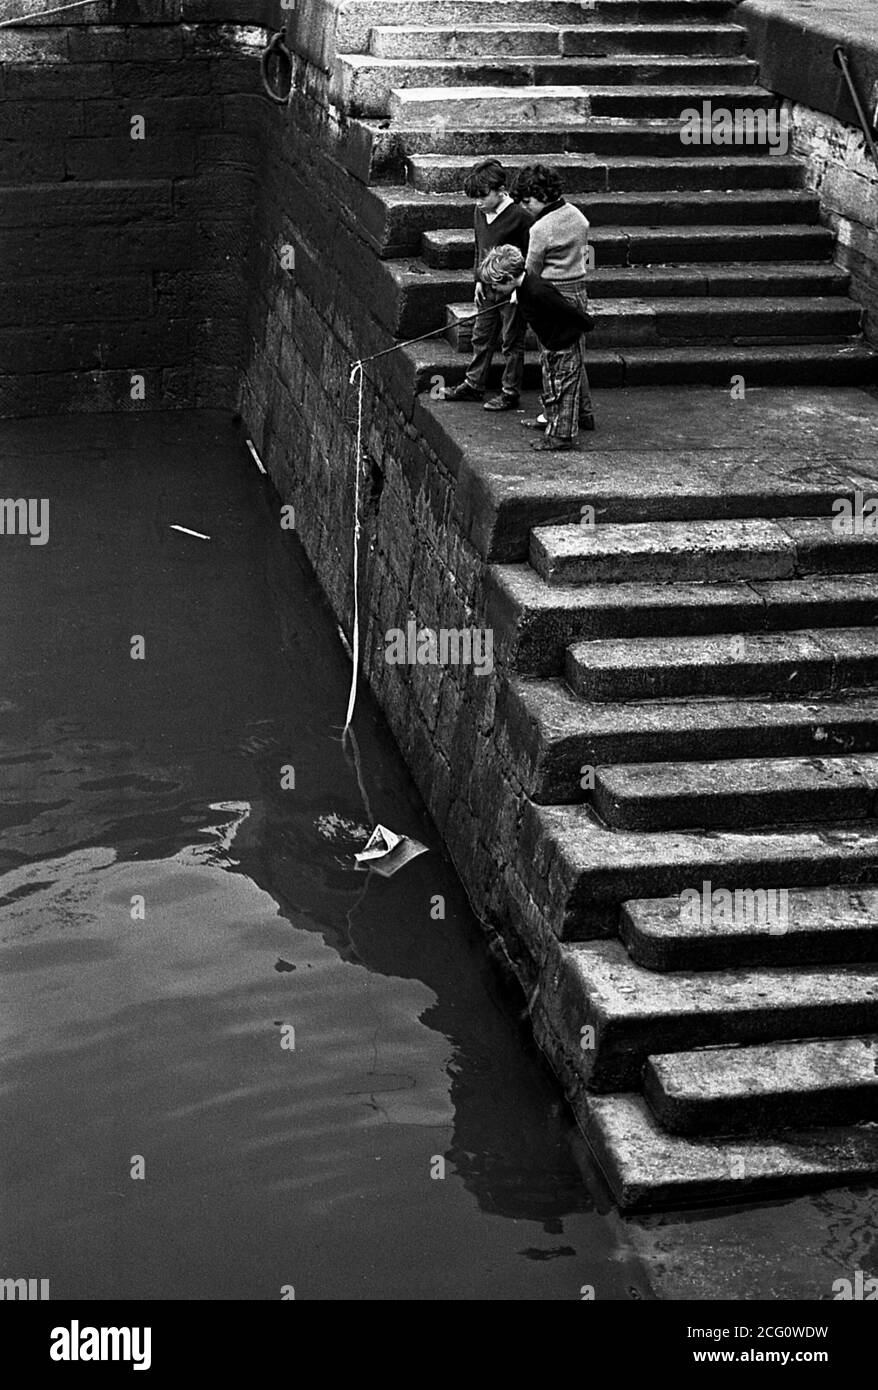 AJAXNETPHOTO. 1967. PORTSMOUTH, ENGLAND. - HOPING FOR A BITE - YOUNGSTERS WITH IMPROVISED FISHING TACKLE ON THE STEPS AT FLATHOUSE QUAY.PHOTO:JONATHAN EASTLAND/AJAX REF:356773 14 6 Stock Photo